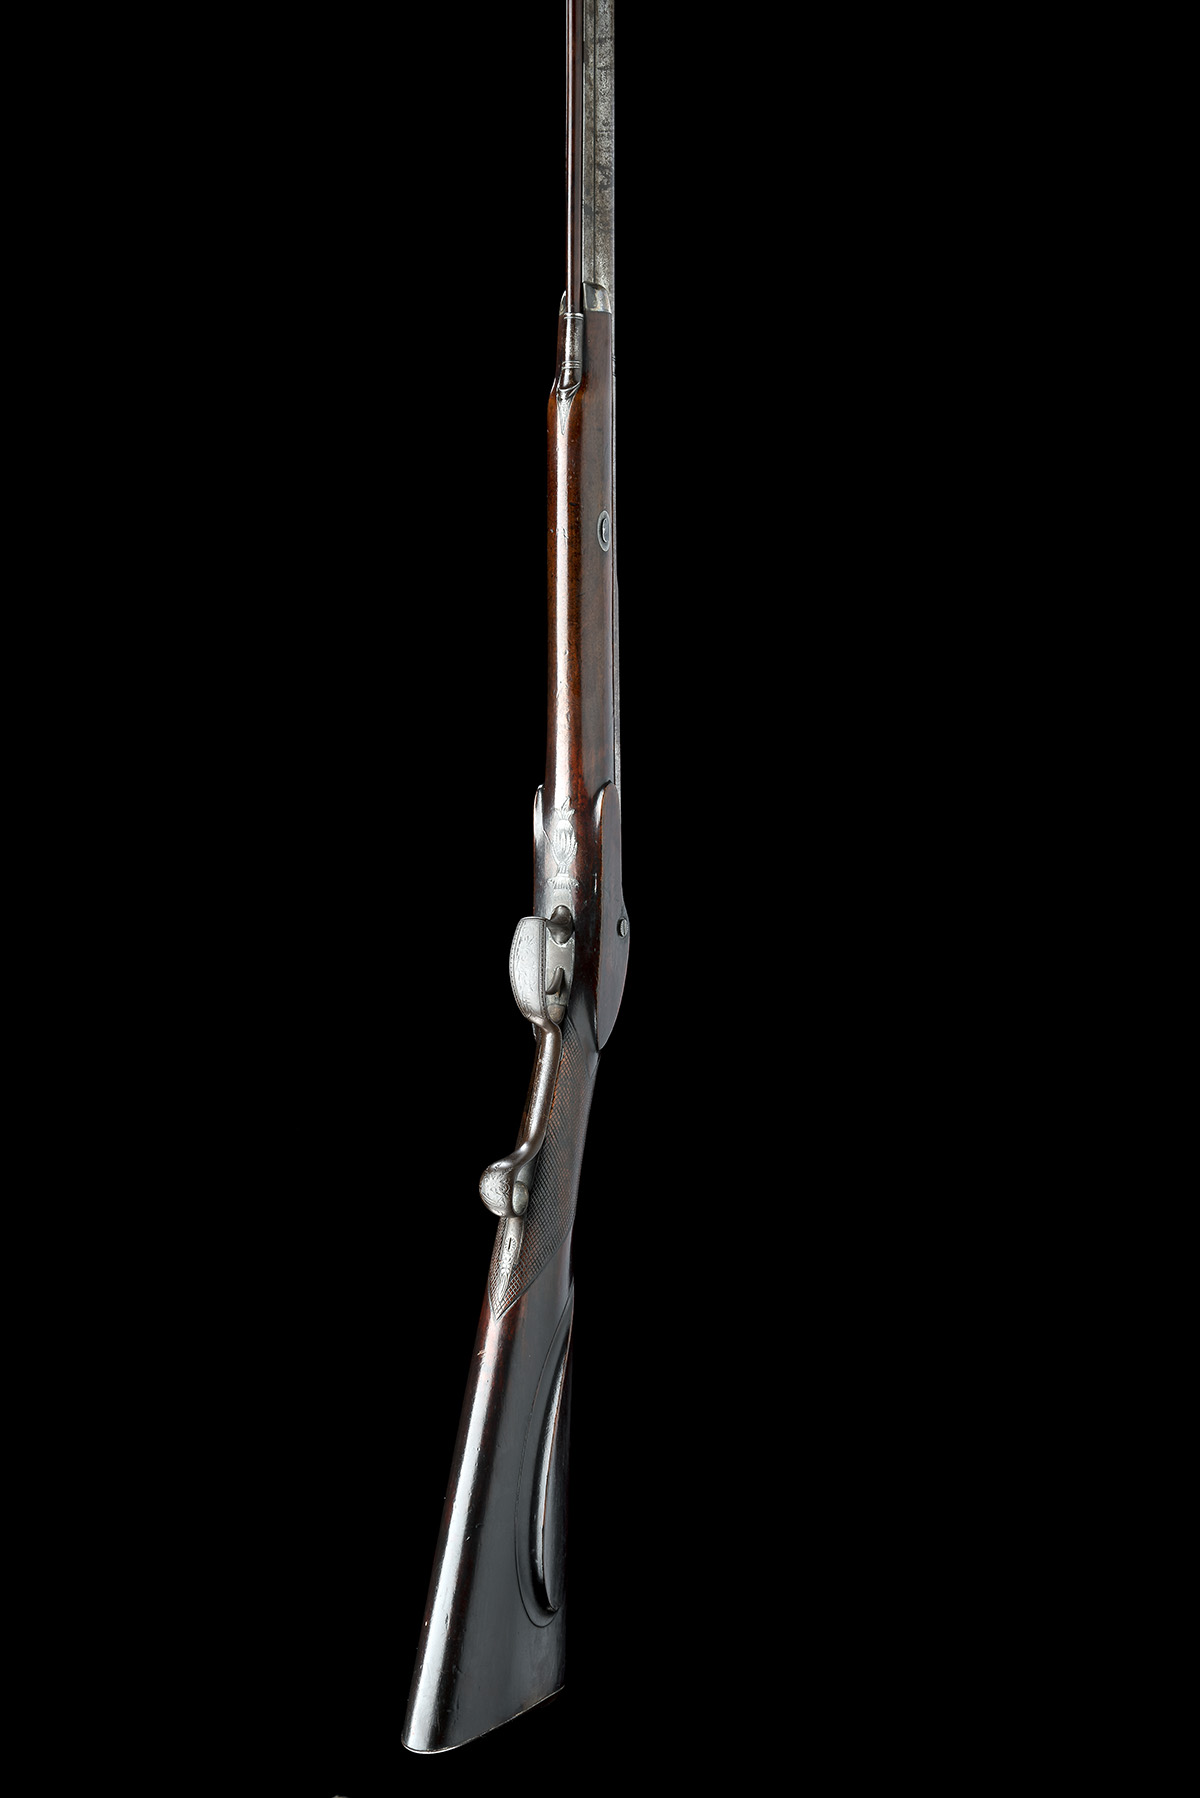 A 12-BORE PERCUSSION SINGLE-BARRELLED SPORTING GUN SIGNED FISHER, LONDON, no visible serial - Image 6 of 8